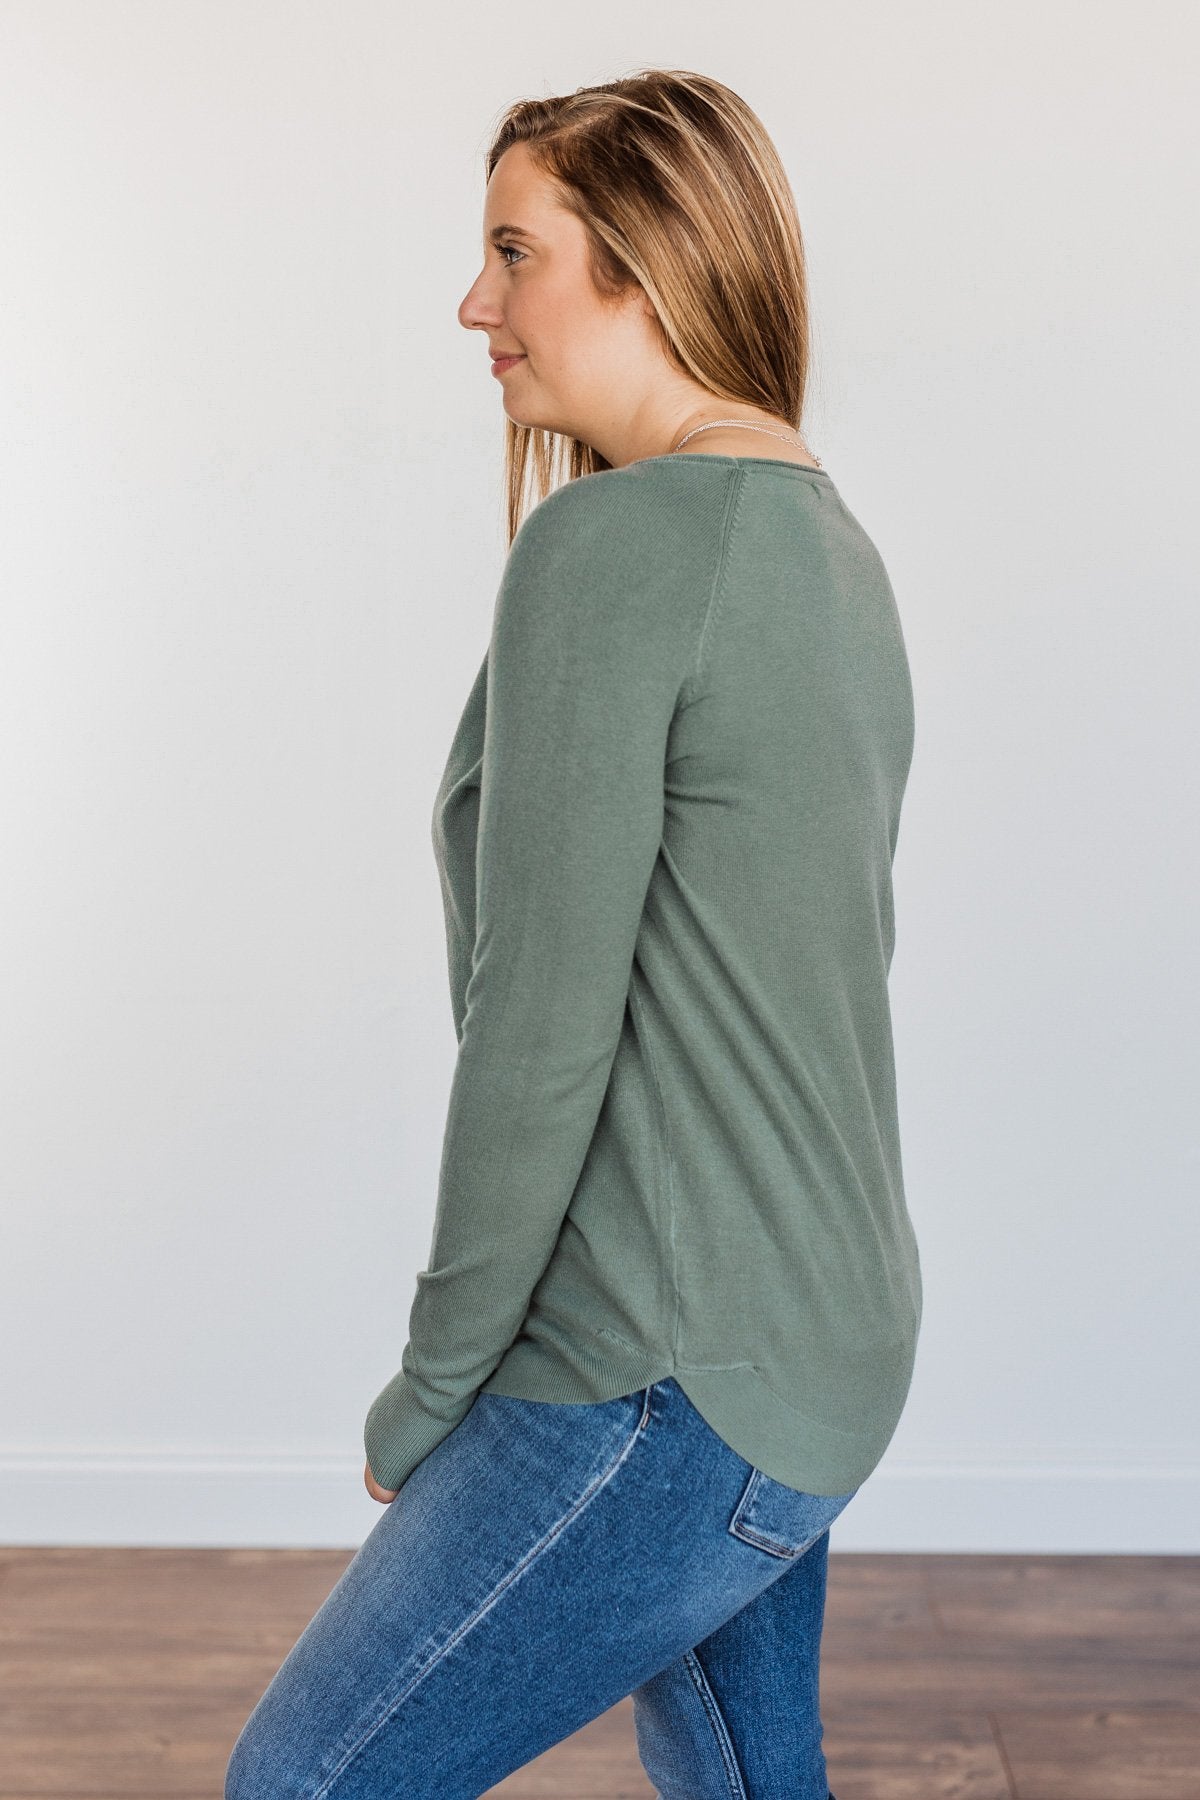 Butter Me Up Knit Sweater- Dusty Jade